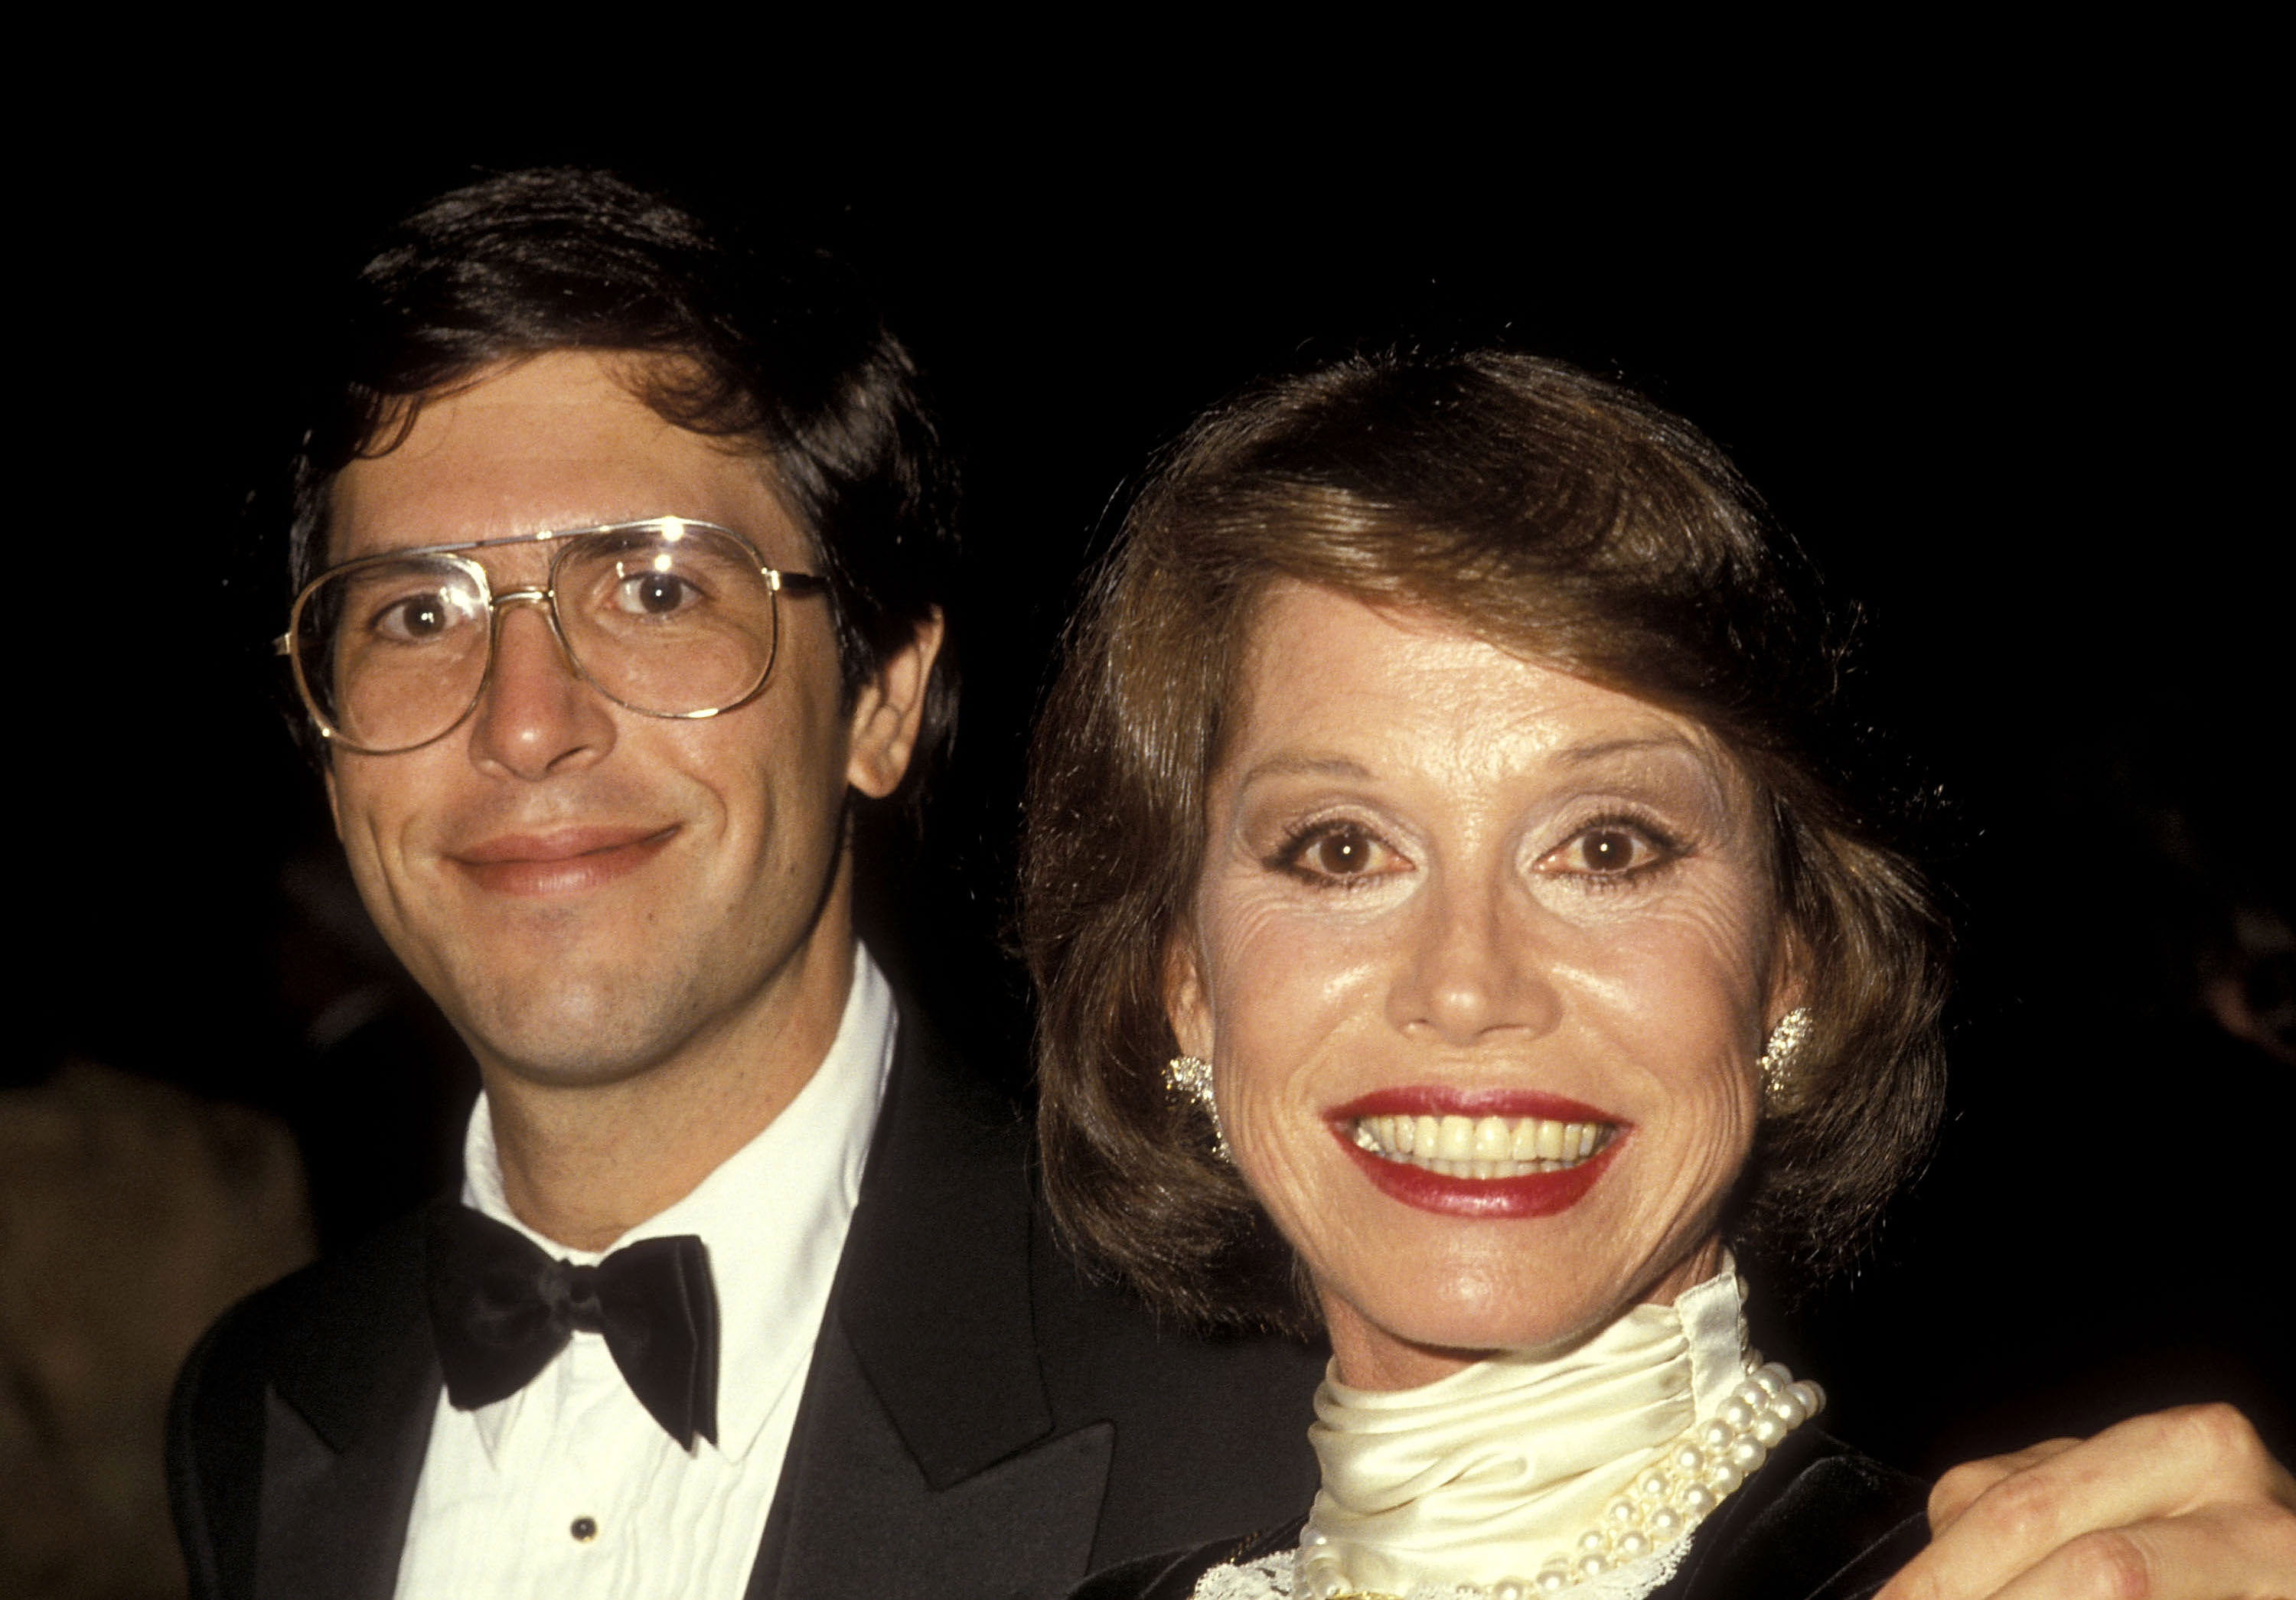 Dr. Robert Levine and Mary Tyler Moore at the Third Annual Television Academy Hall of Fame Induction Ceremony on March 23, 1986 | Source: Getty Images